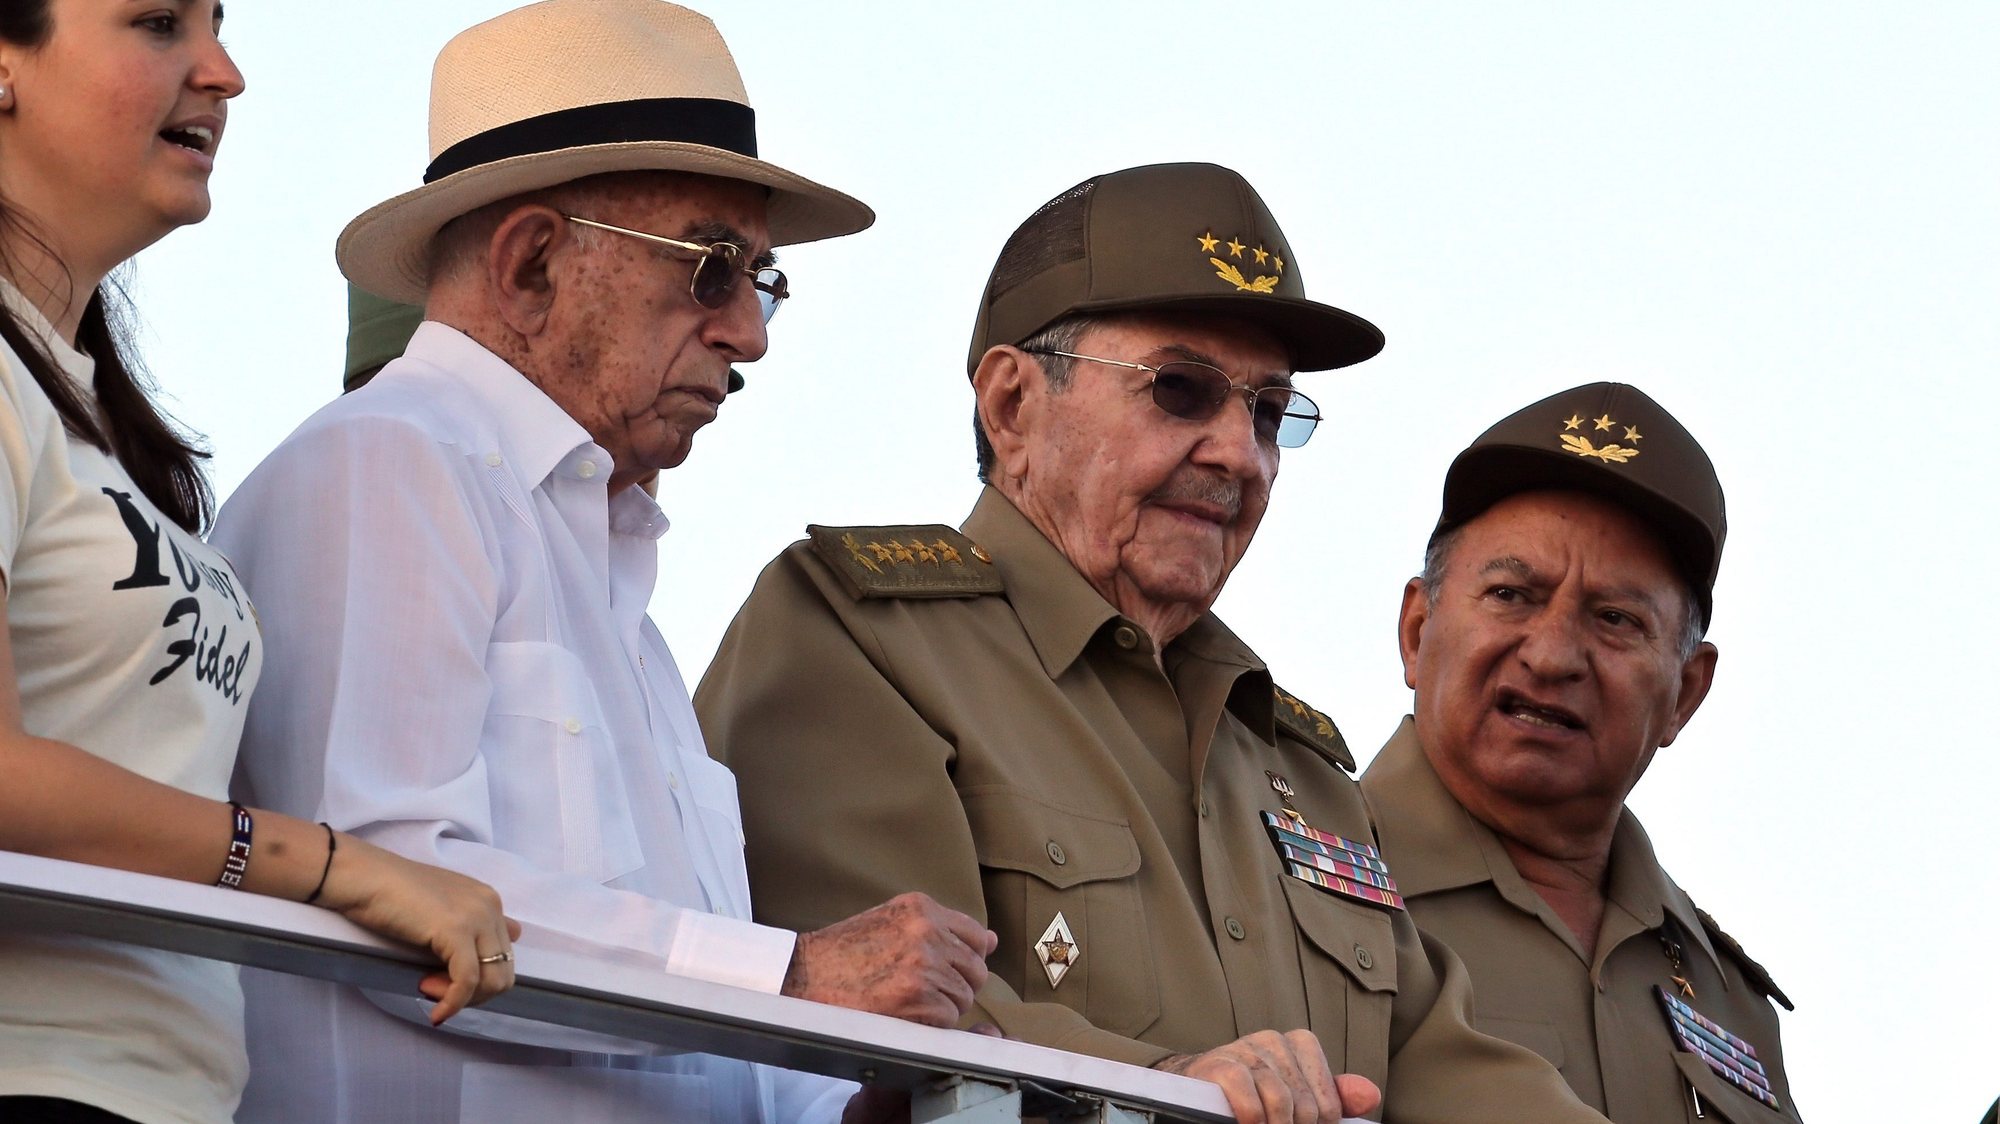 epa05695209 Cuban President Raul Castro (2-R), with Comunist Party under secretary Jose Ramon Machado (2-L), Revolutionary Army Forces minister Leopoldo Cintra Frias (R) and President of the Universitary Students Federation Jennifer Bella (L) attend the military parade on the occasion of the 58th anniversary of the Cuban Revolution, at the Revolution Square, in Havana, Cuba, 02 January 2017. The military parade and march of the &#039;combative people&#039; is dedicated to former Cuban leader Fidel Castro, who died last November 2016.  EPA/ALEJANDRO ERNESTO